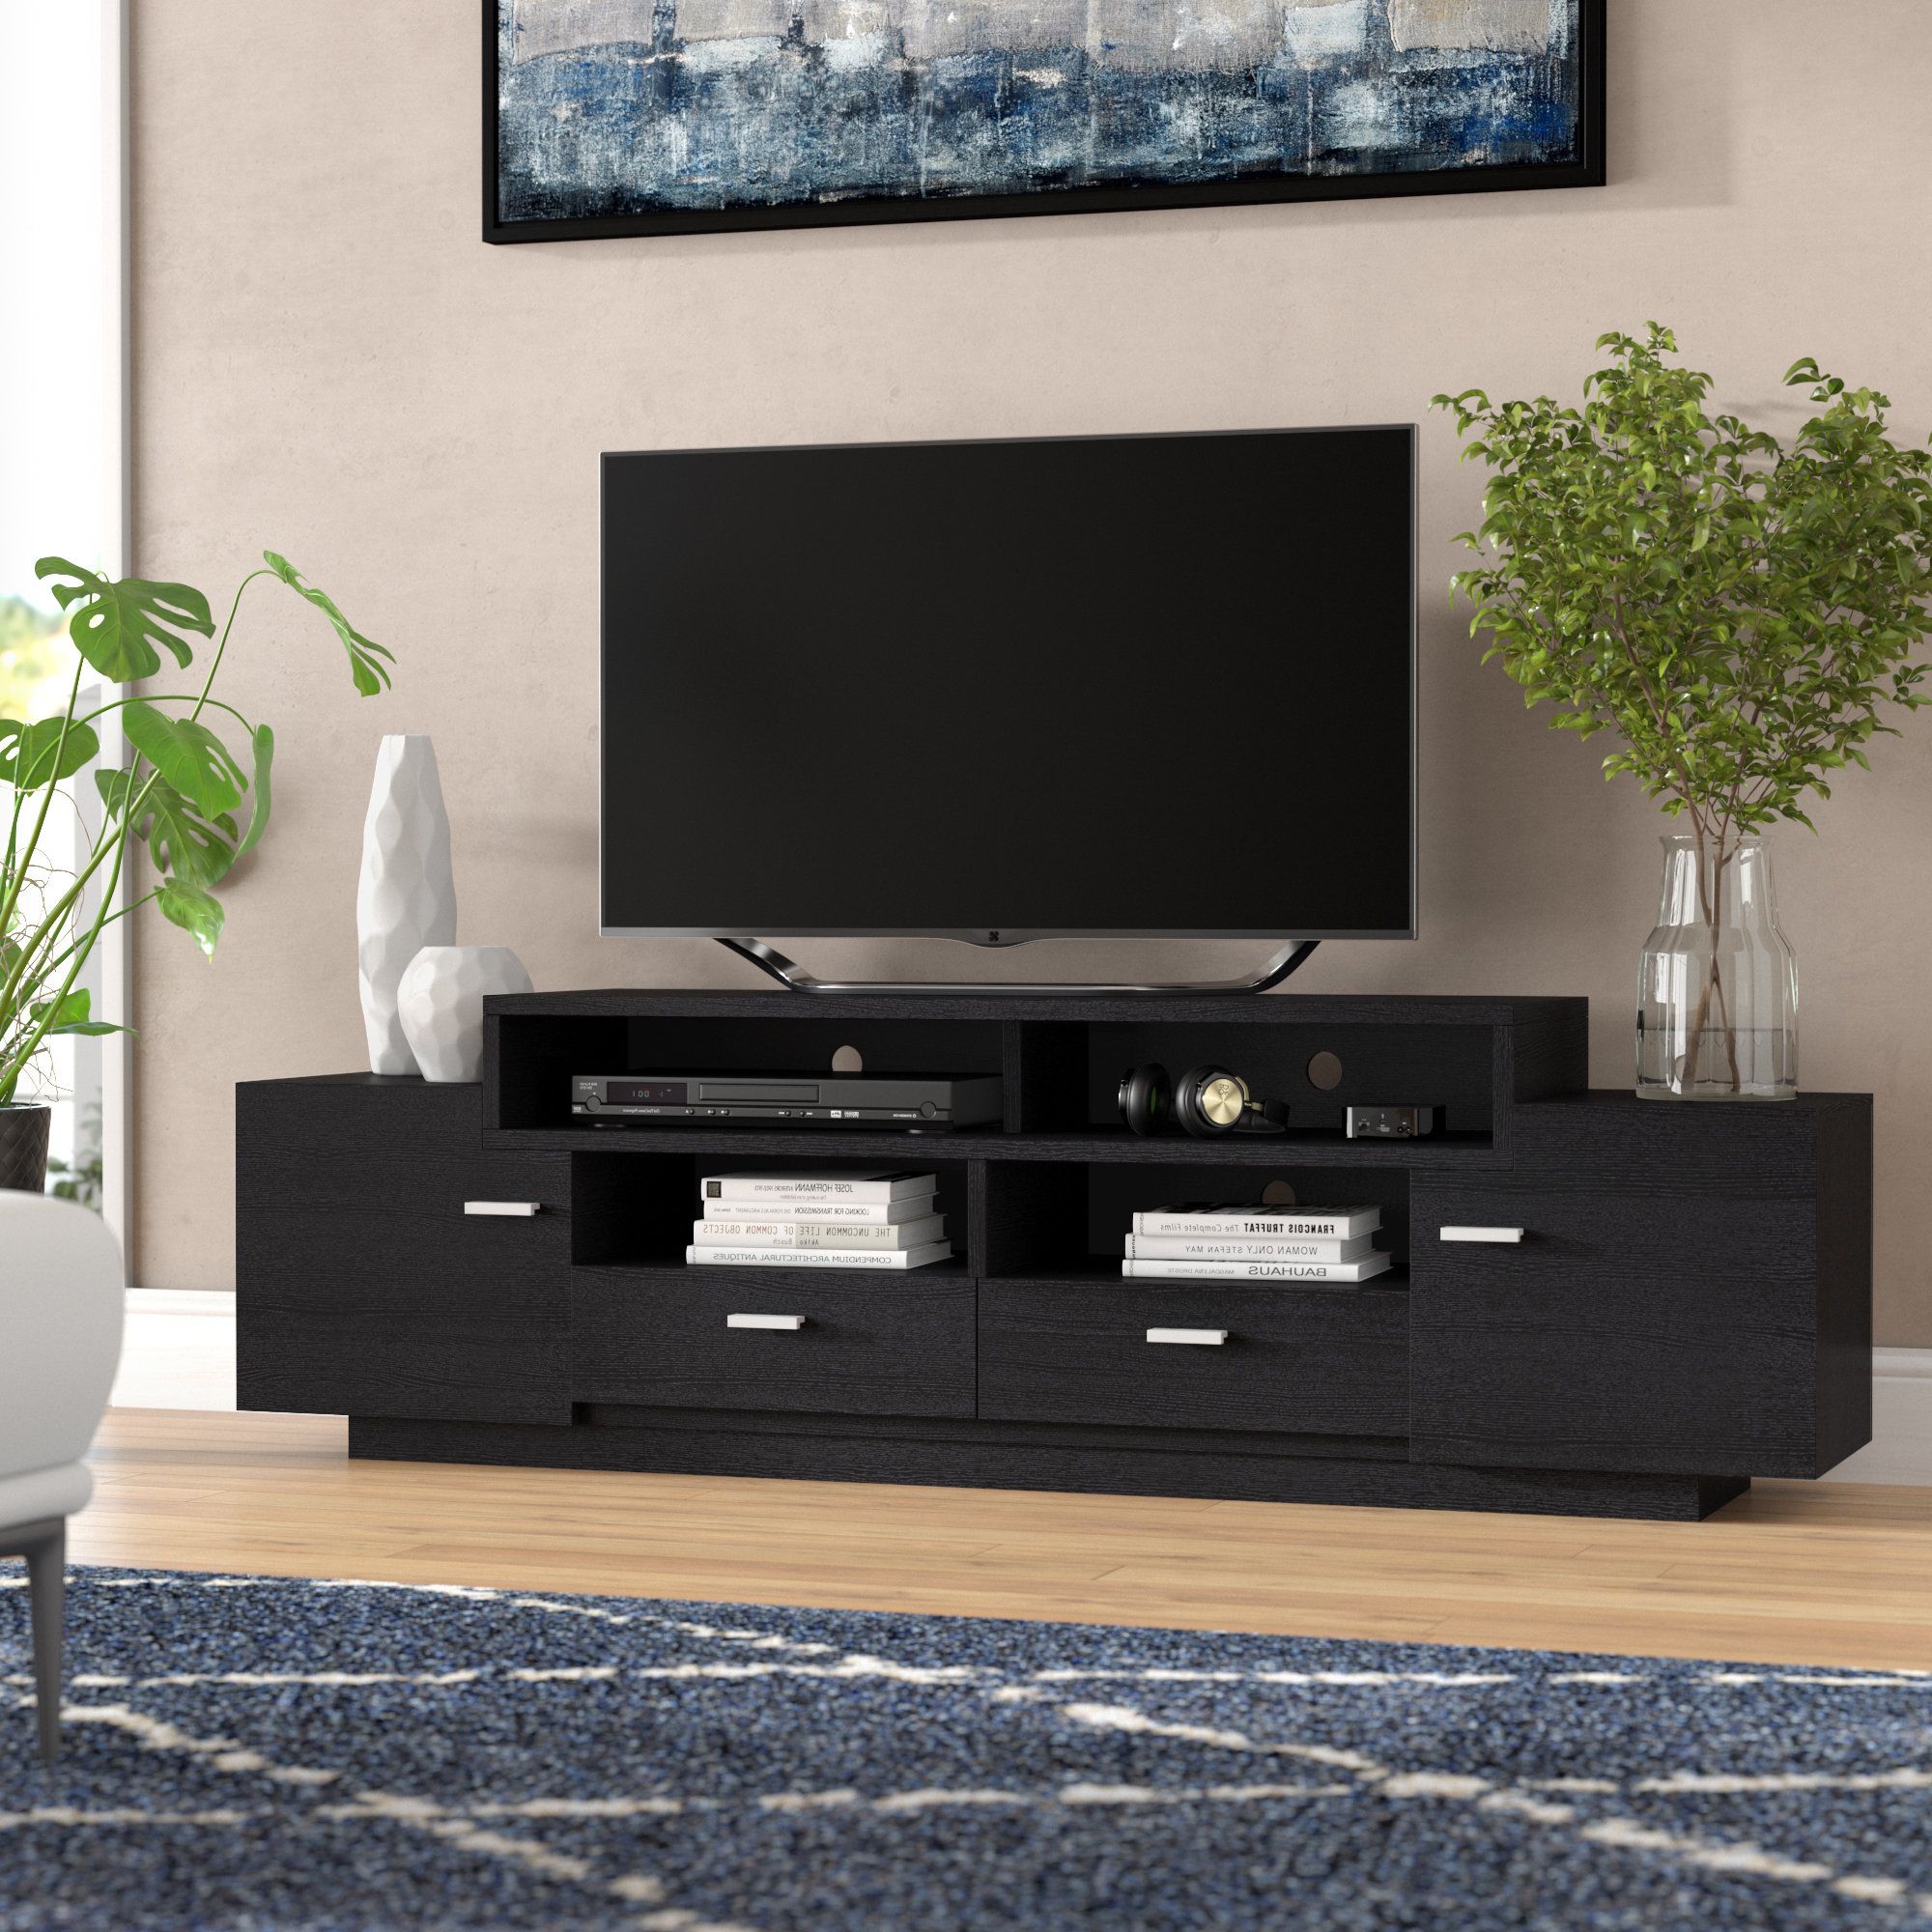 Vizio 24 Inch Tv Stands Inside Well Known 70+ Inch Tv Stands You'll Love (View 18 of 20)